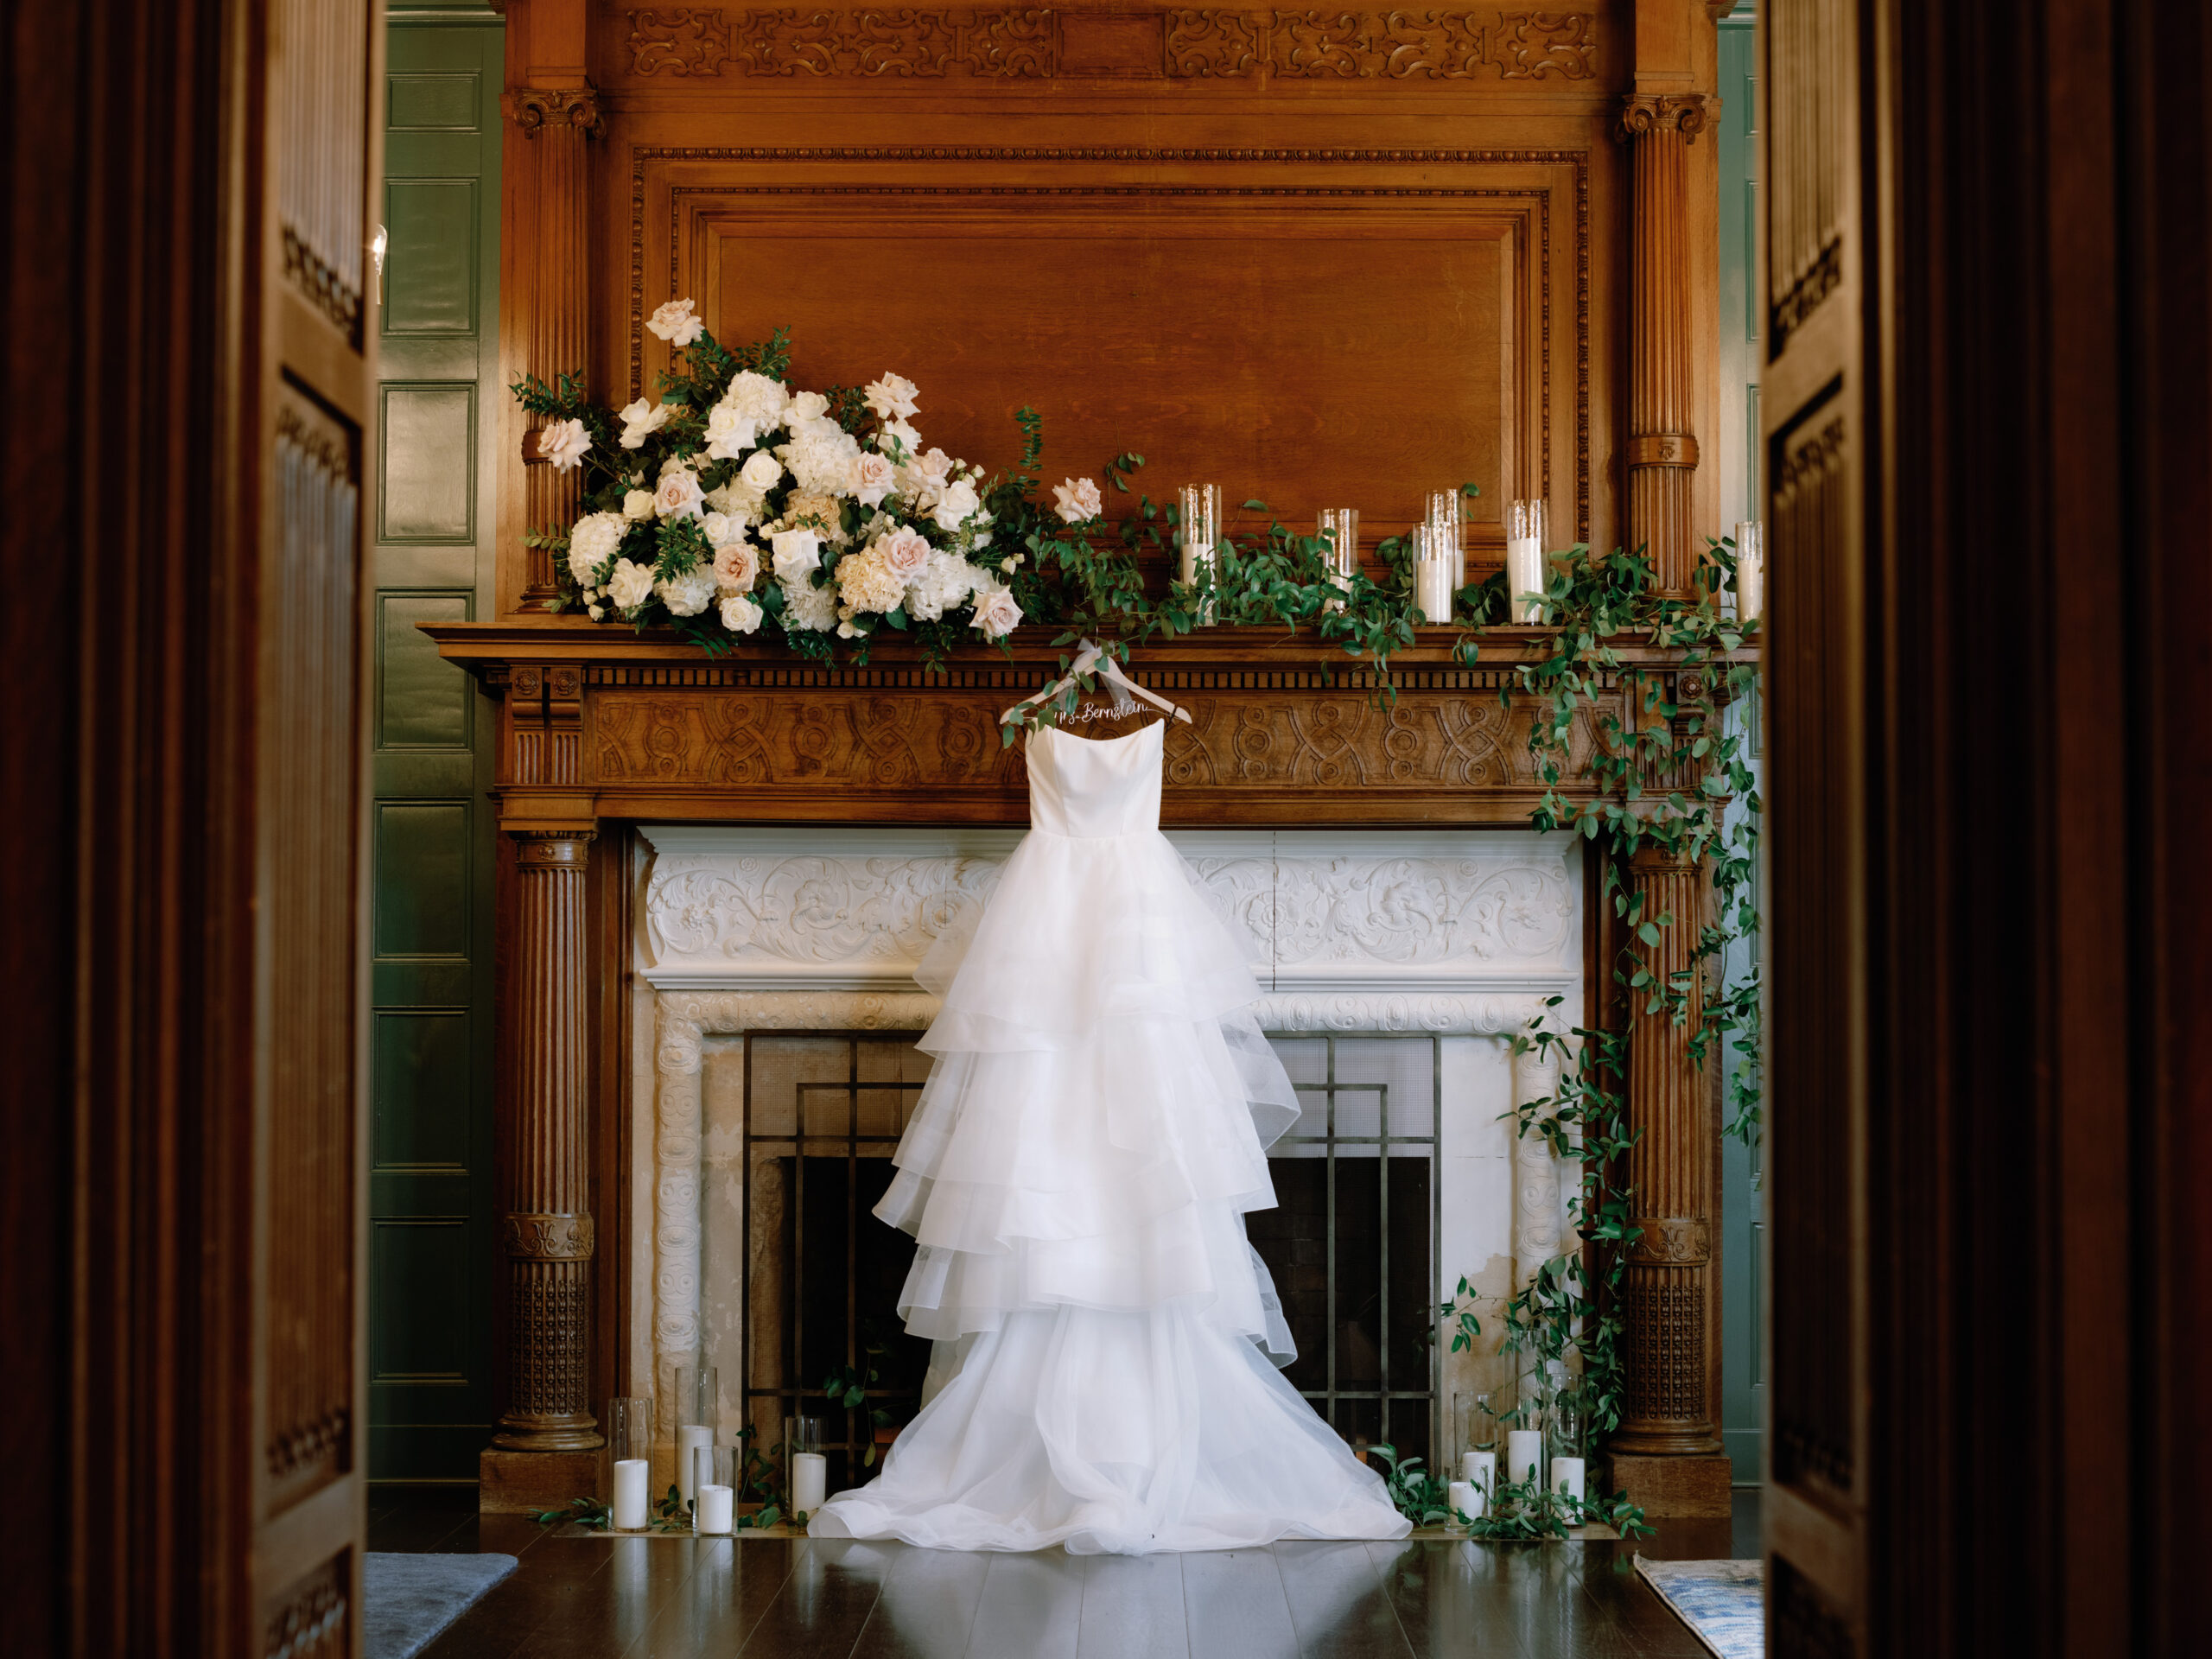 The bride's wedding dress is hanging in front of the fireplace. Timeless wedding photography Image by Jenny Fu Studio